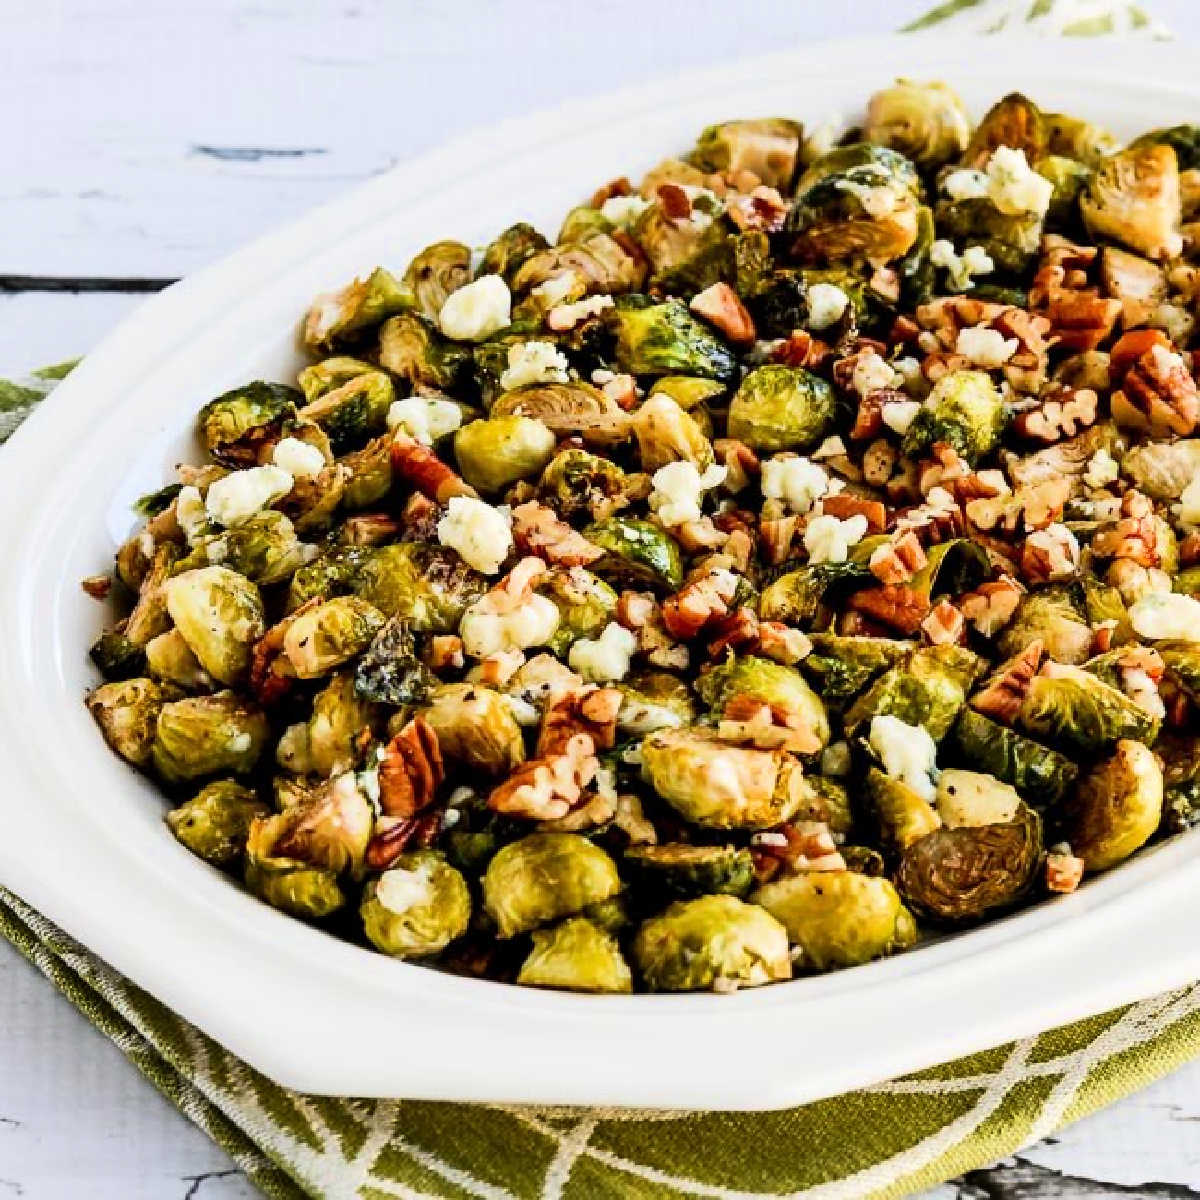 Square image for Roasted Brussels Sprouts with Pecans and Gorgonzola shown on serving plate.